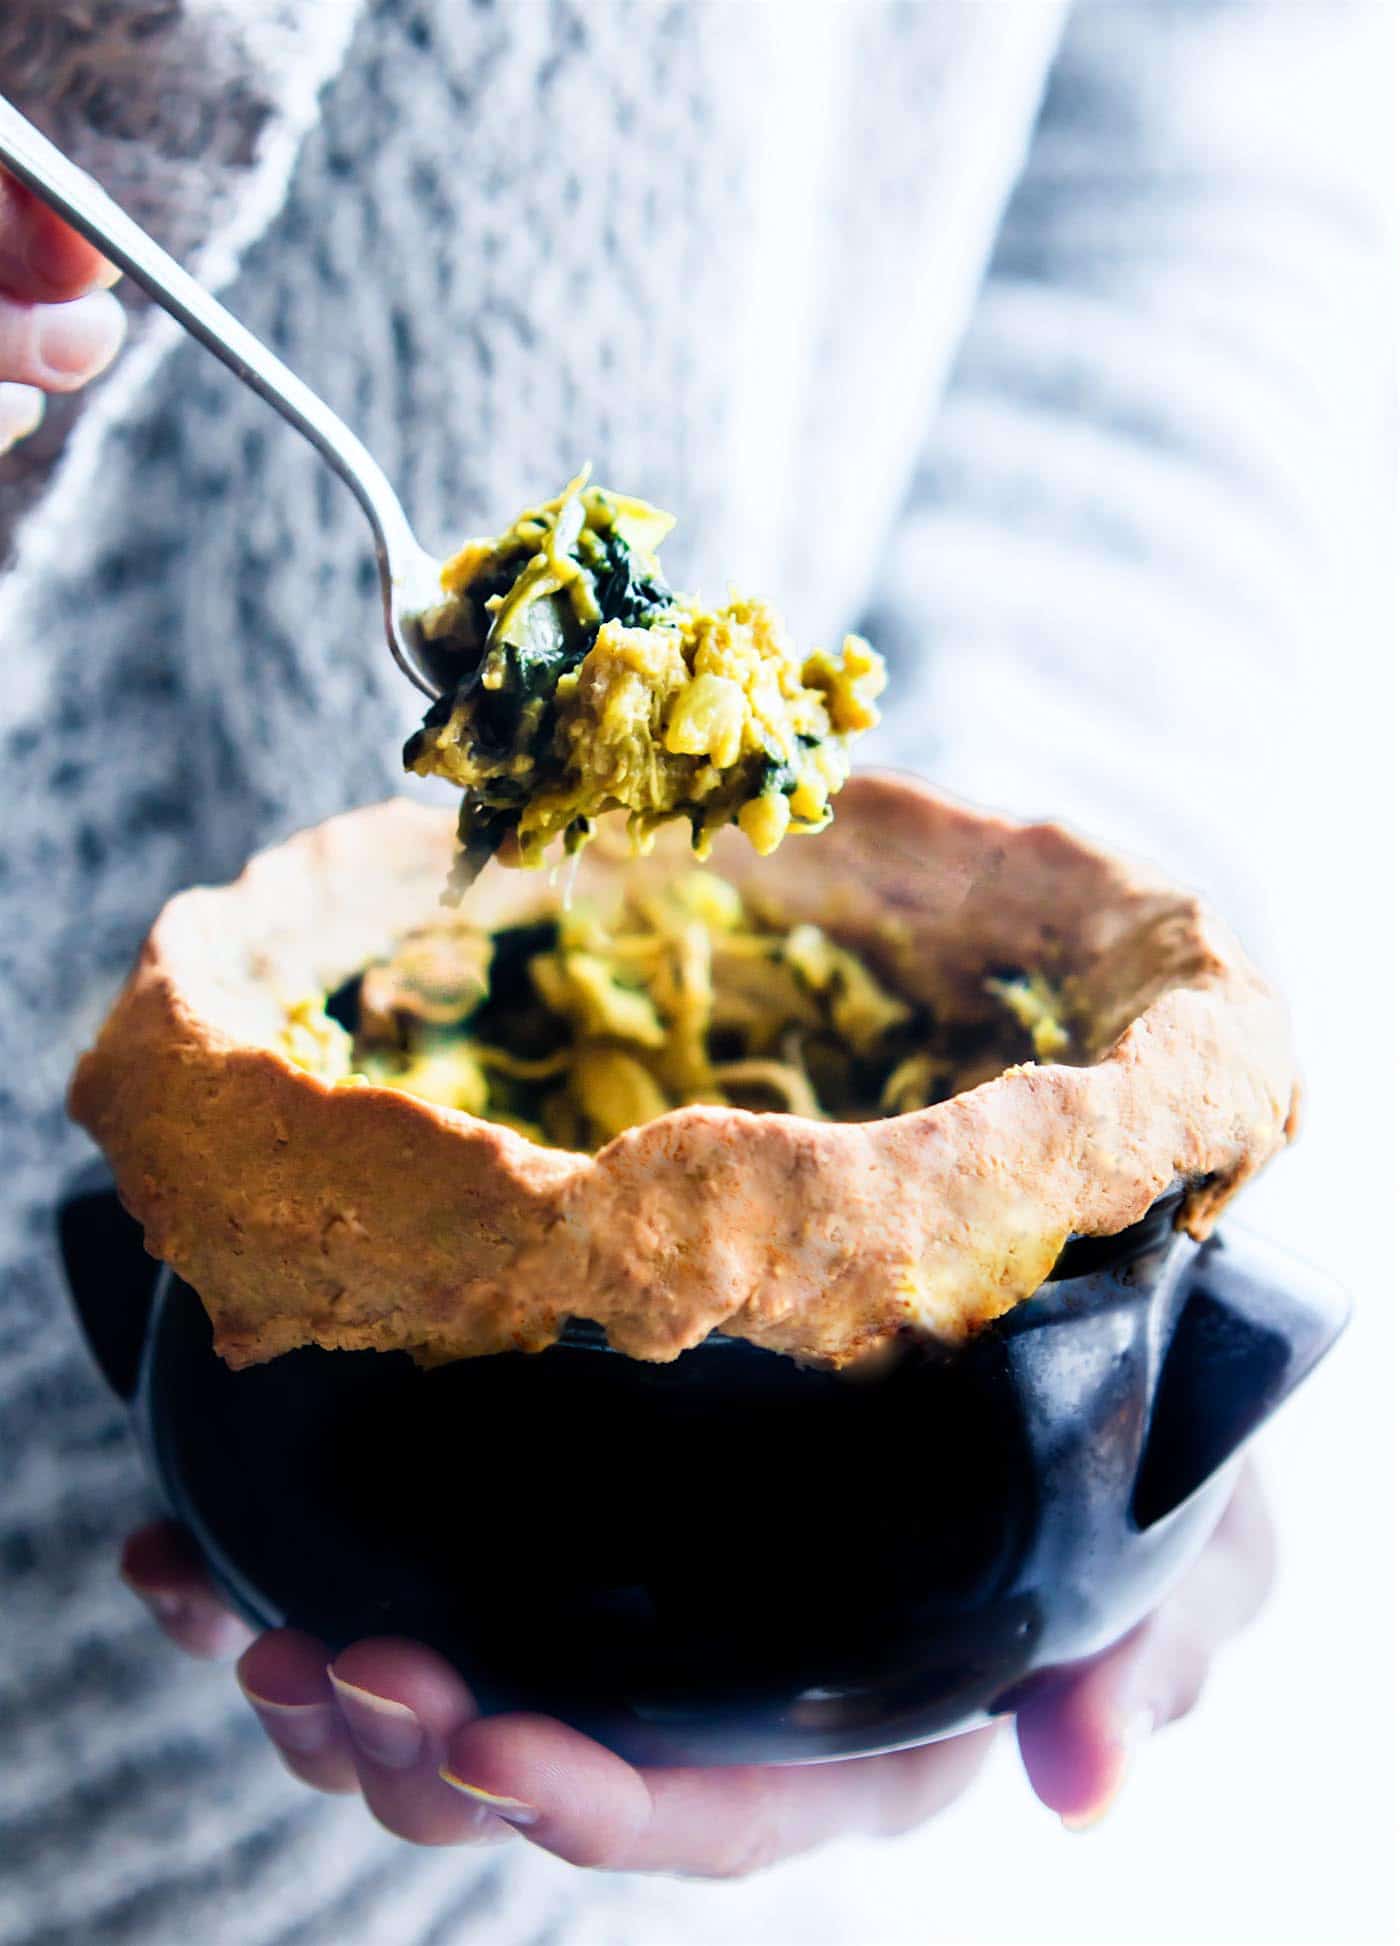 Gluten Free Chicken Curry Pot Pies filled with creamy spinach, curried lentils, and roasted chicken. These gluten free chicken curry pot pies are quick to make for several mini pot pies or one! A chicken curry filling that will warm the body and soul. Dairy Free, healthy, delicious! 